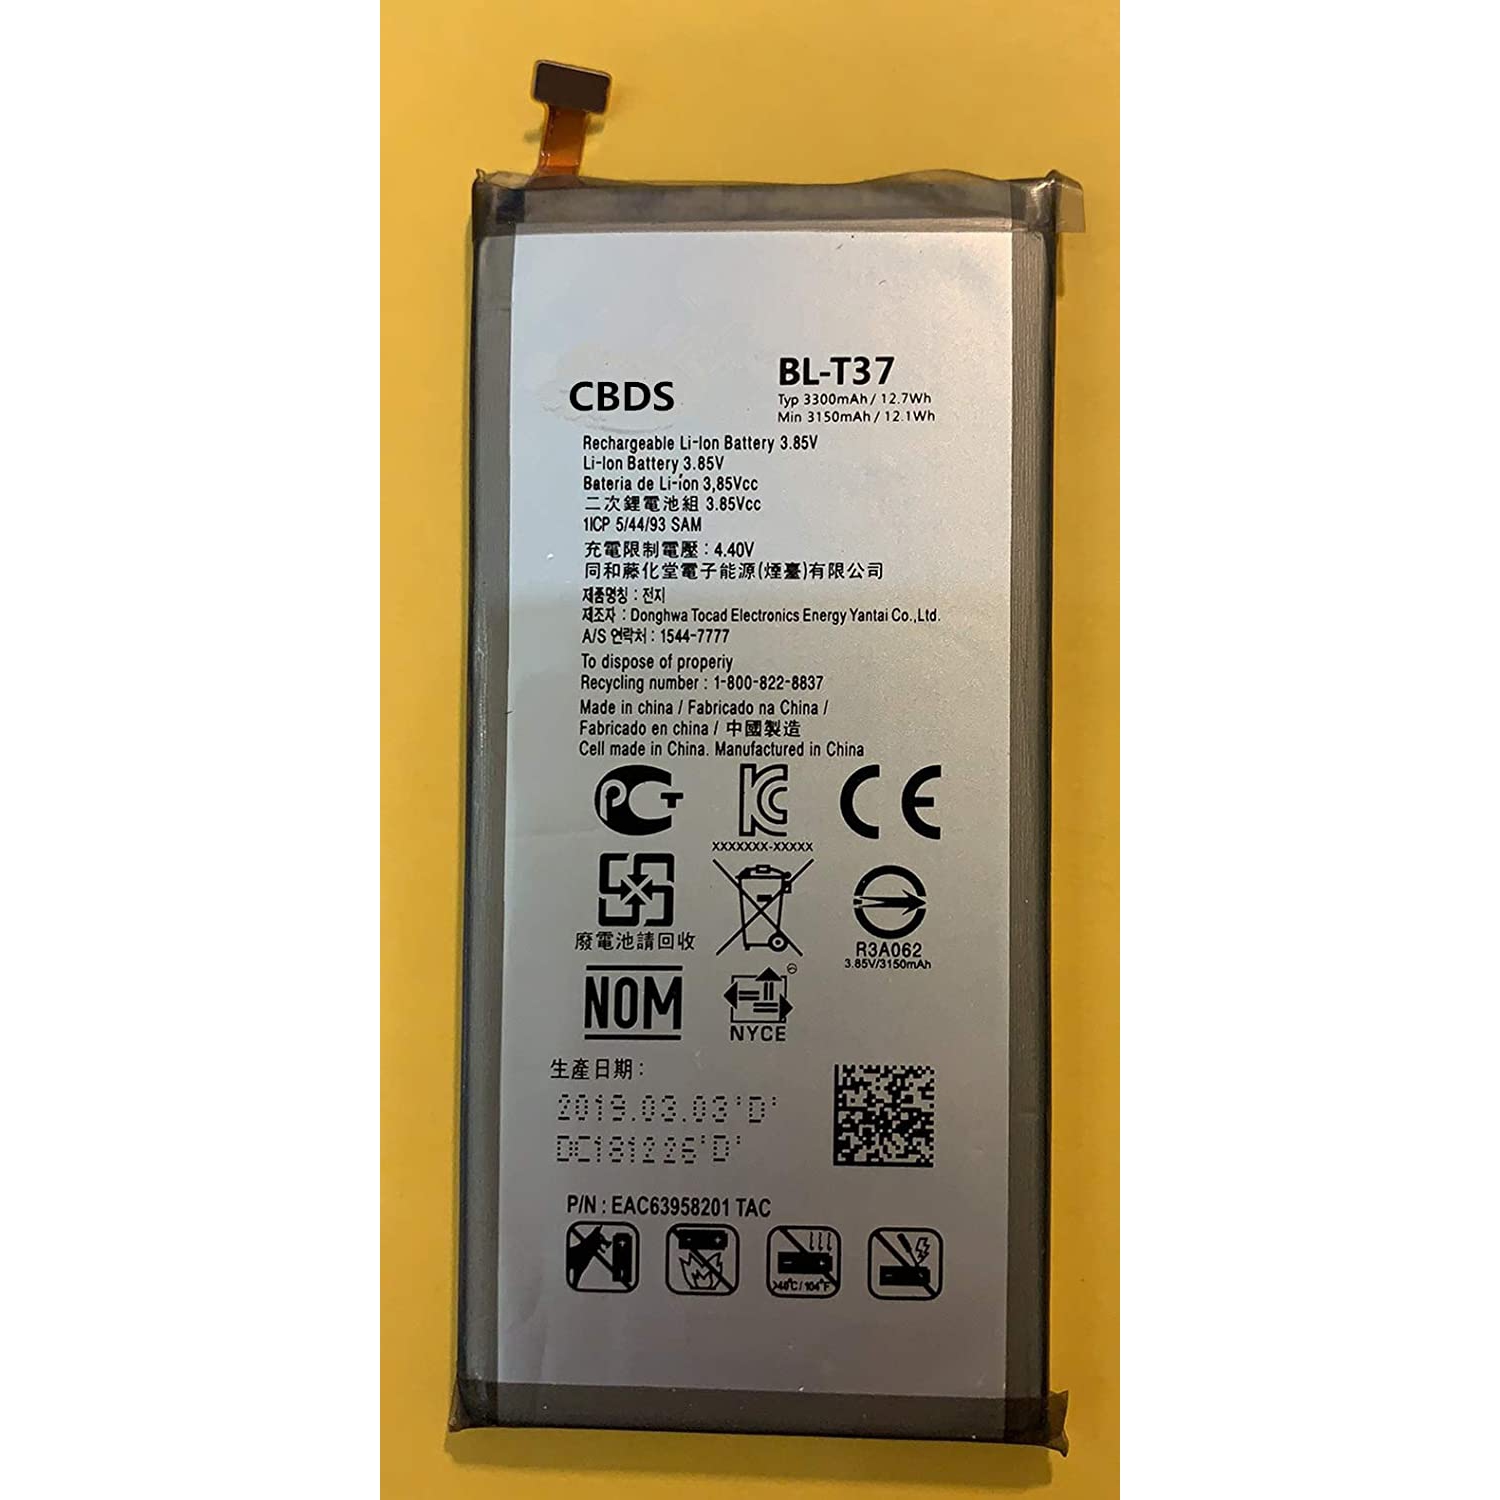 (CBDS) 3150mAh, 12.1 Wh Replacement Battery - Compatible with LG STYLO 4 V40 THINQ Q8 Q815 2018 BL-T37 in Non-Retail